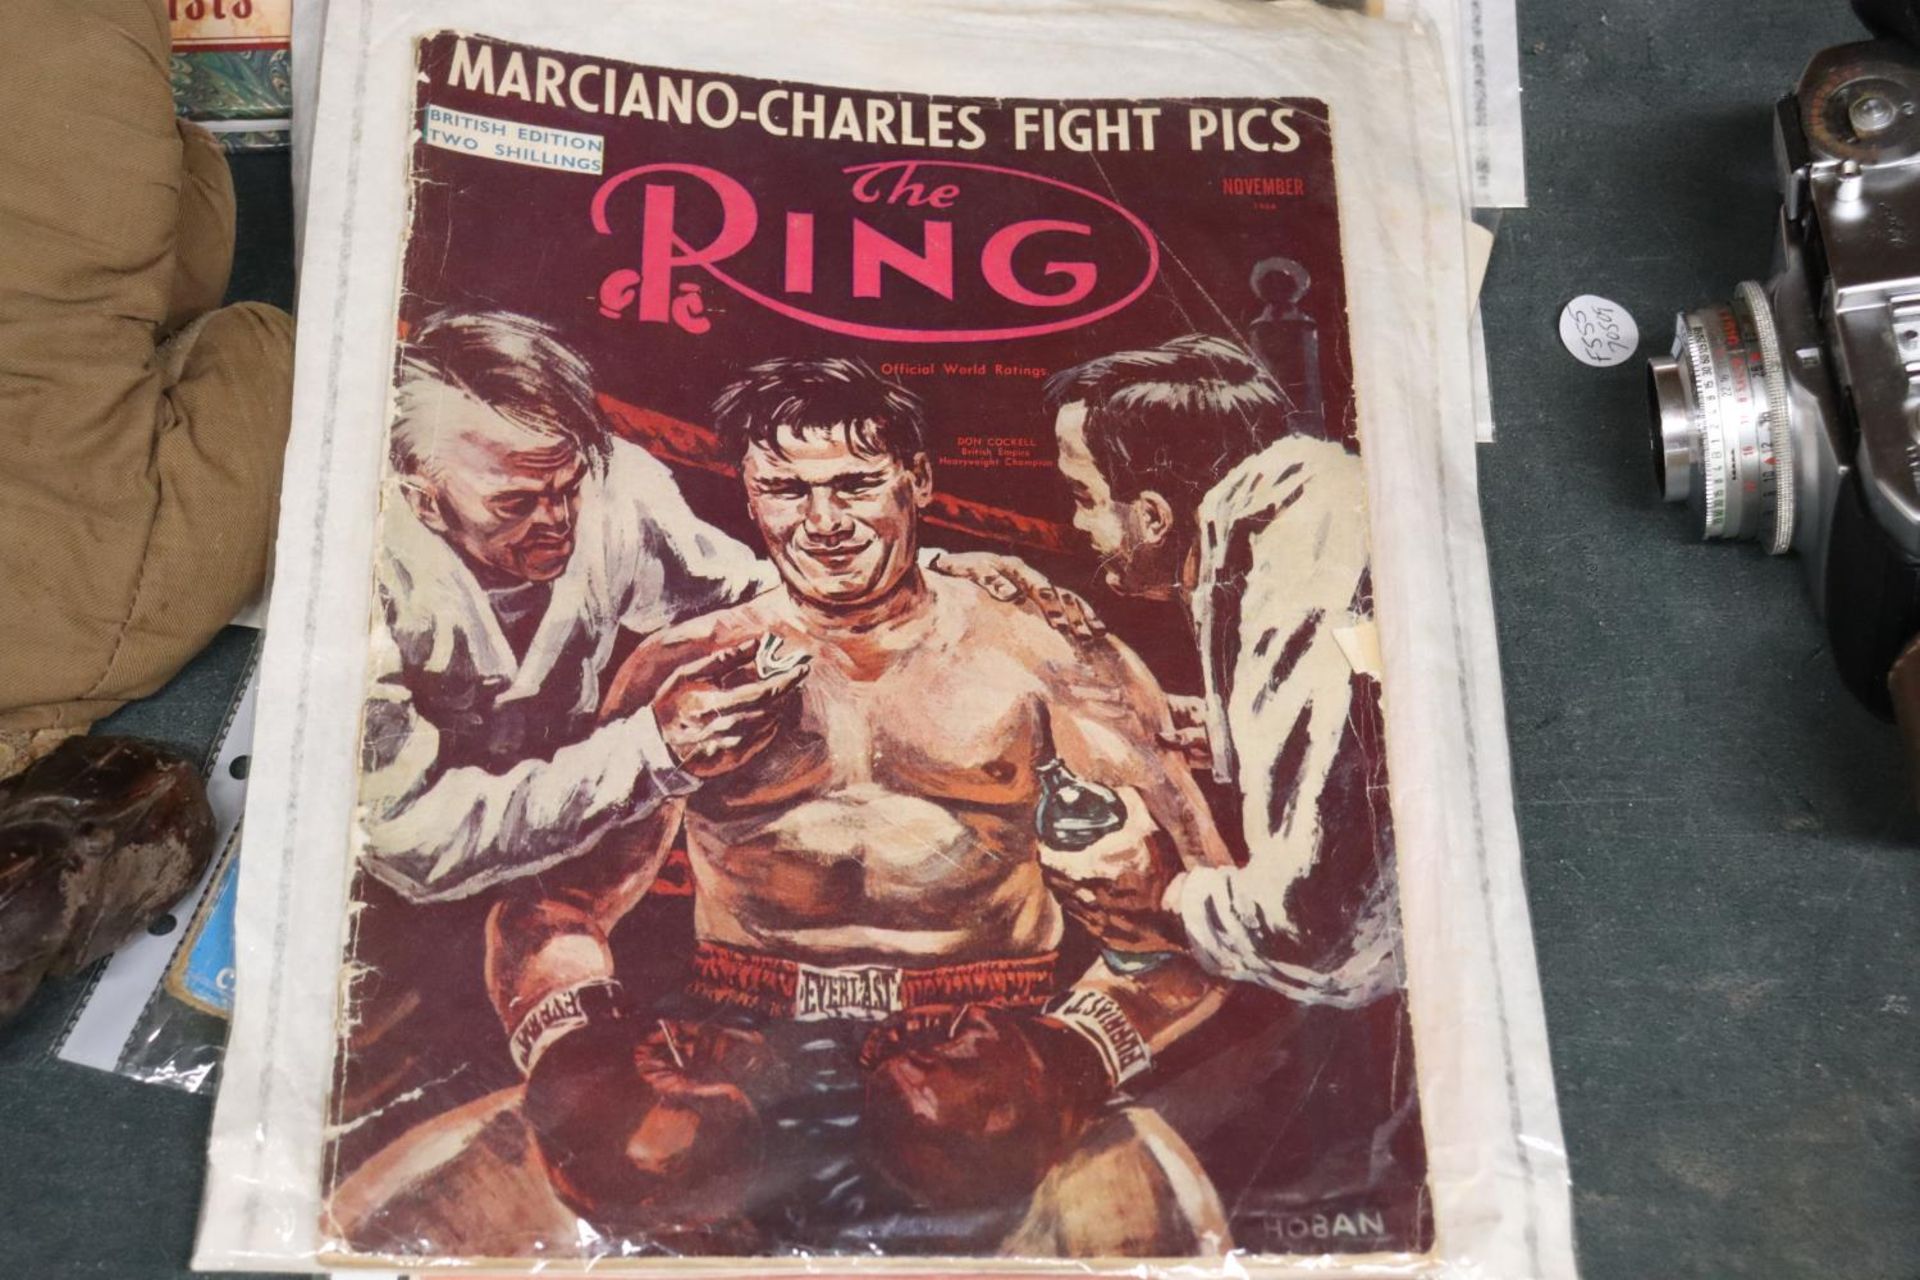 A COLLECTION OF VINTAGE BOXING ITEMS TO INCLUDE GLOVES, BOOK AND MAGAZINES - Image 5 of 7